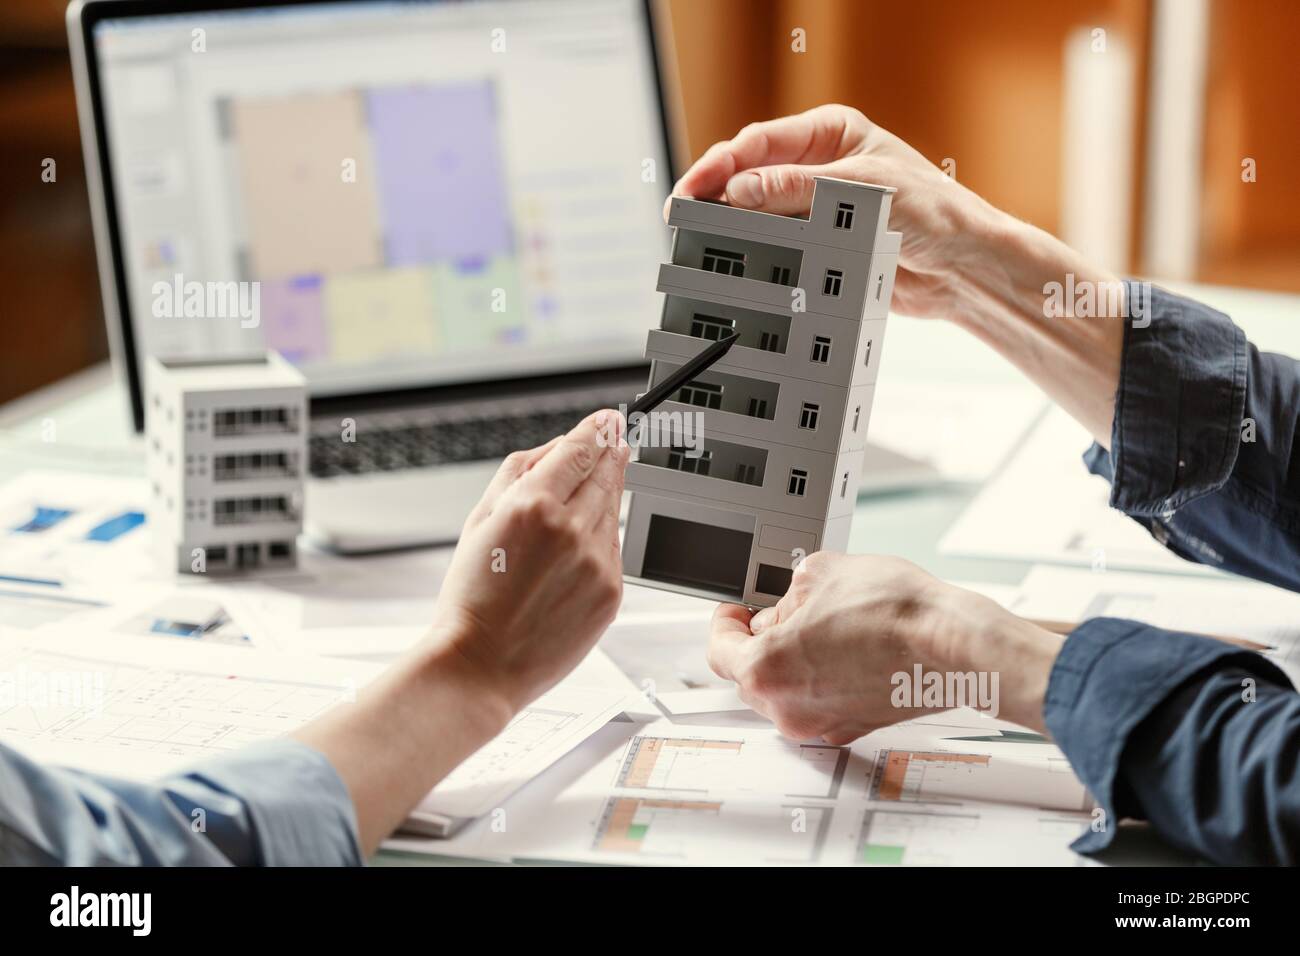 Two architects holding and discussing model of a house and architectural plans in a studio with blueprints and laptop on a table. Architectural desigh Stock Photo